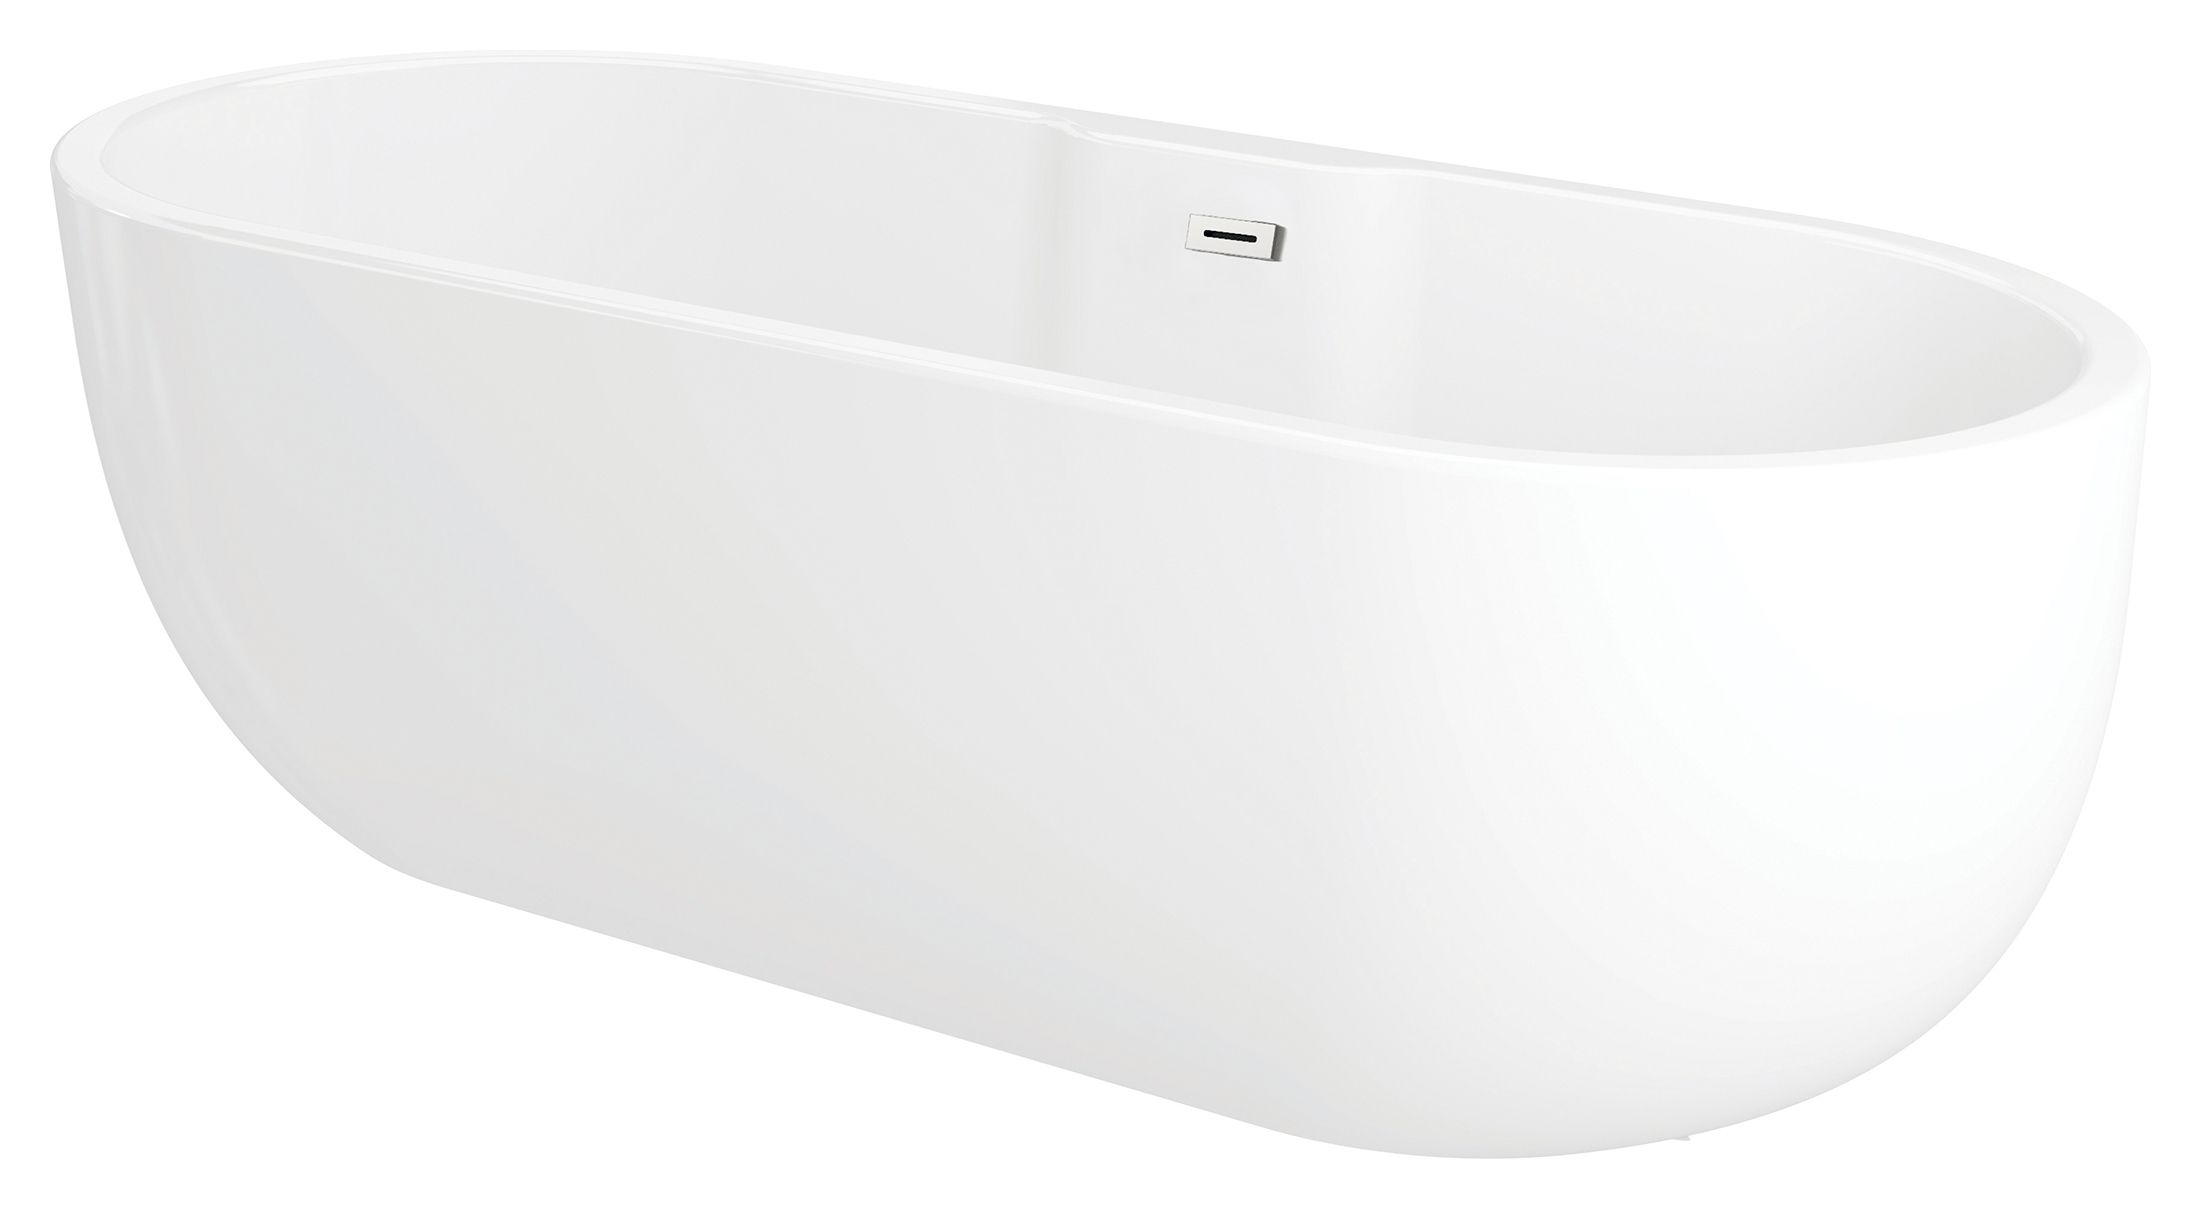 Image of Wickes Oval Freestanding Contemporary Bath - 1800 x 750mm